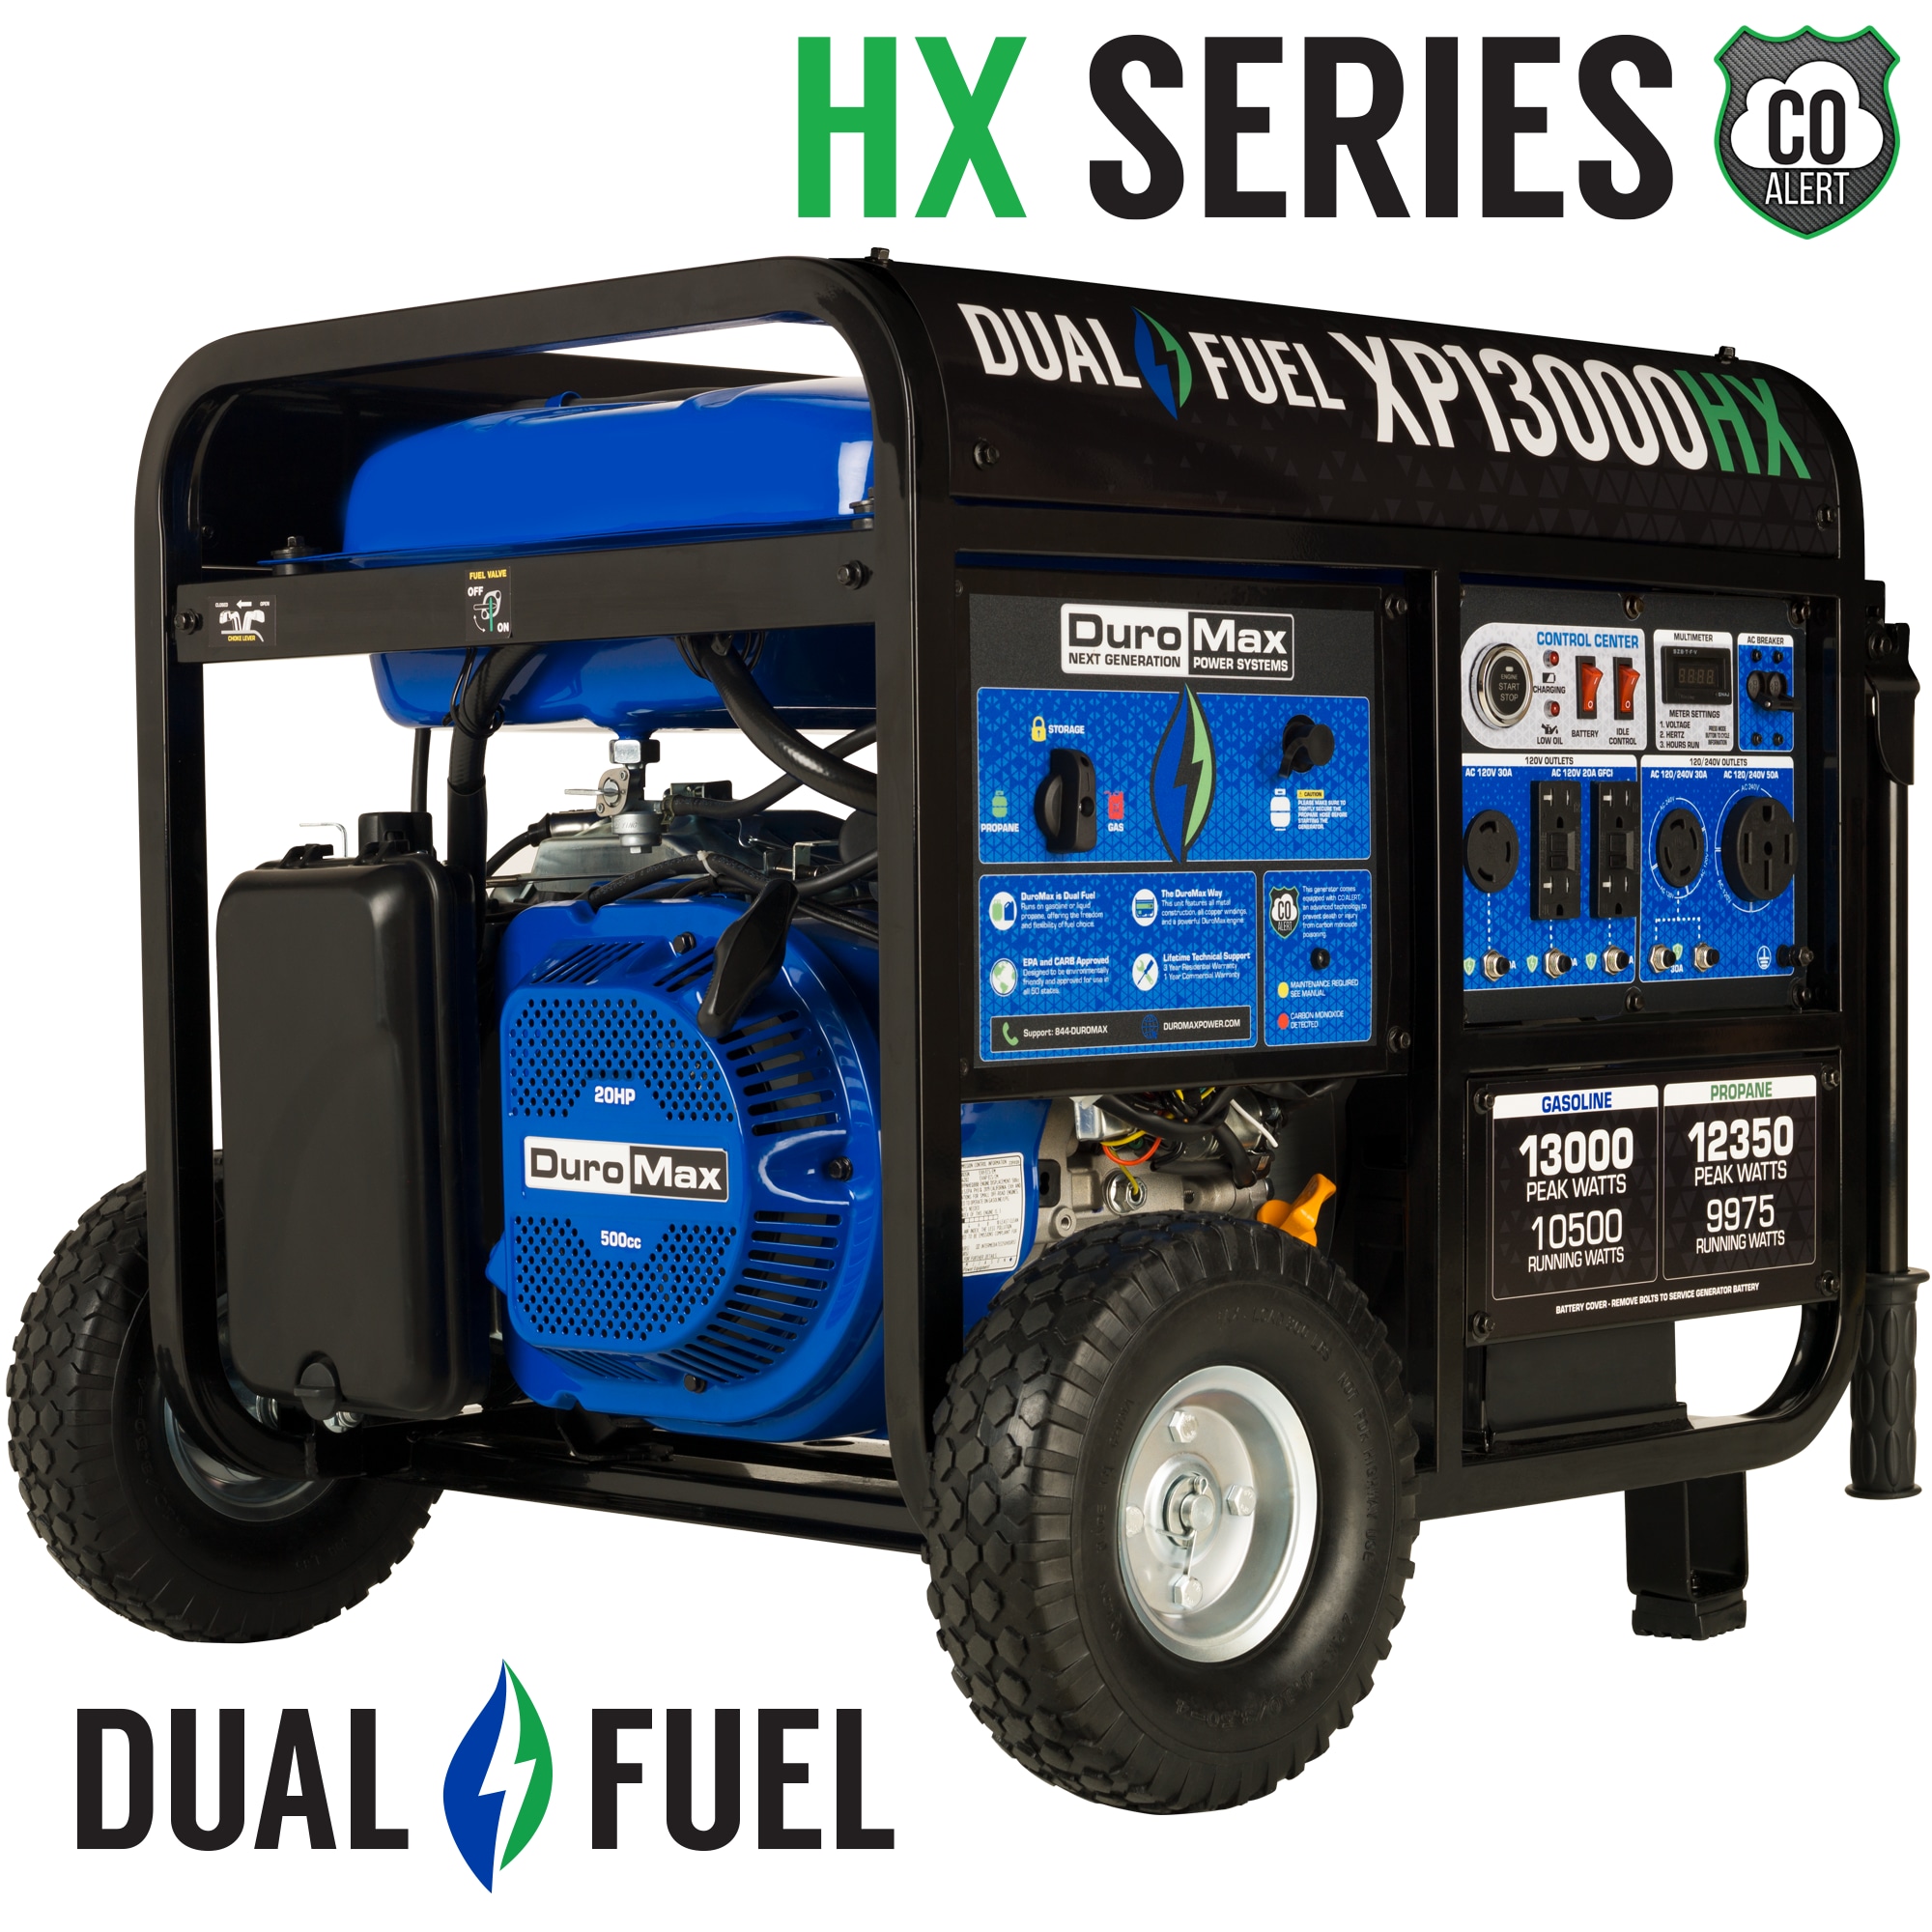 the 10500-Watt Generator HX DuroMax Generators department Up Home Back at Power Portable in Start 500cc Portable Electric